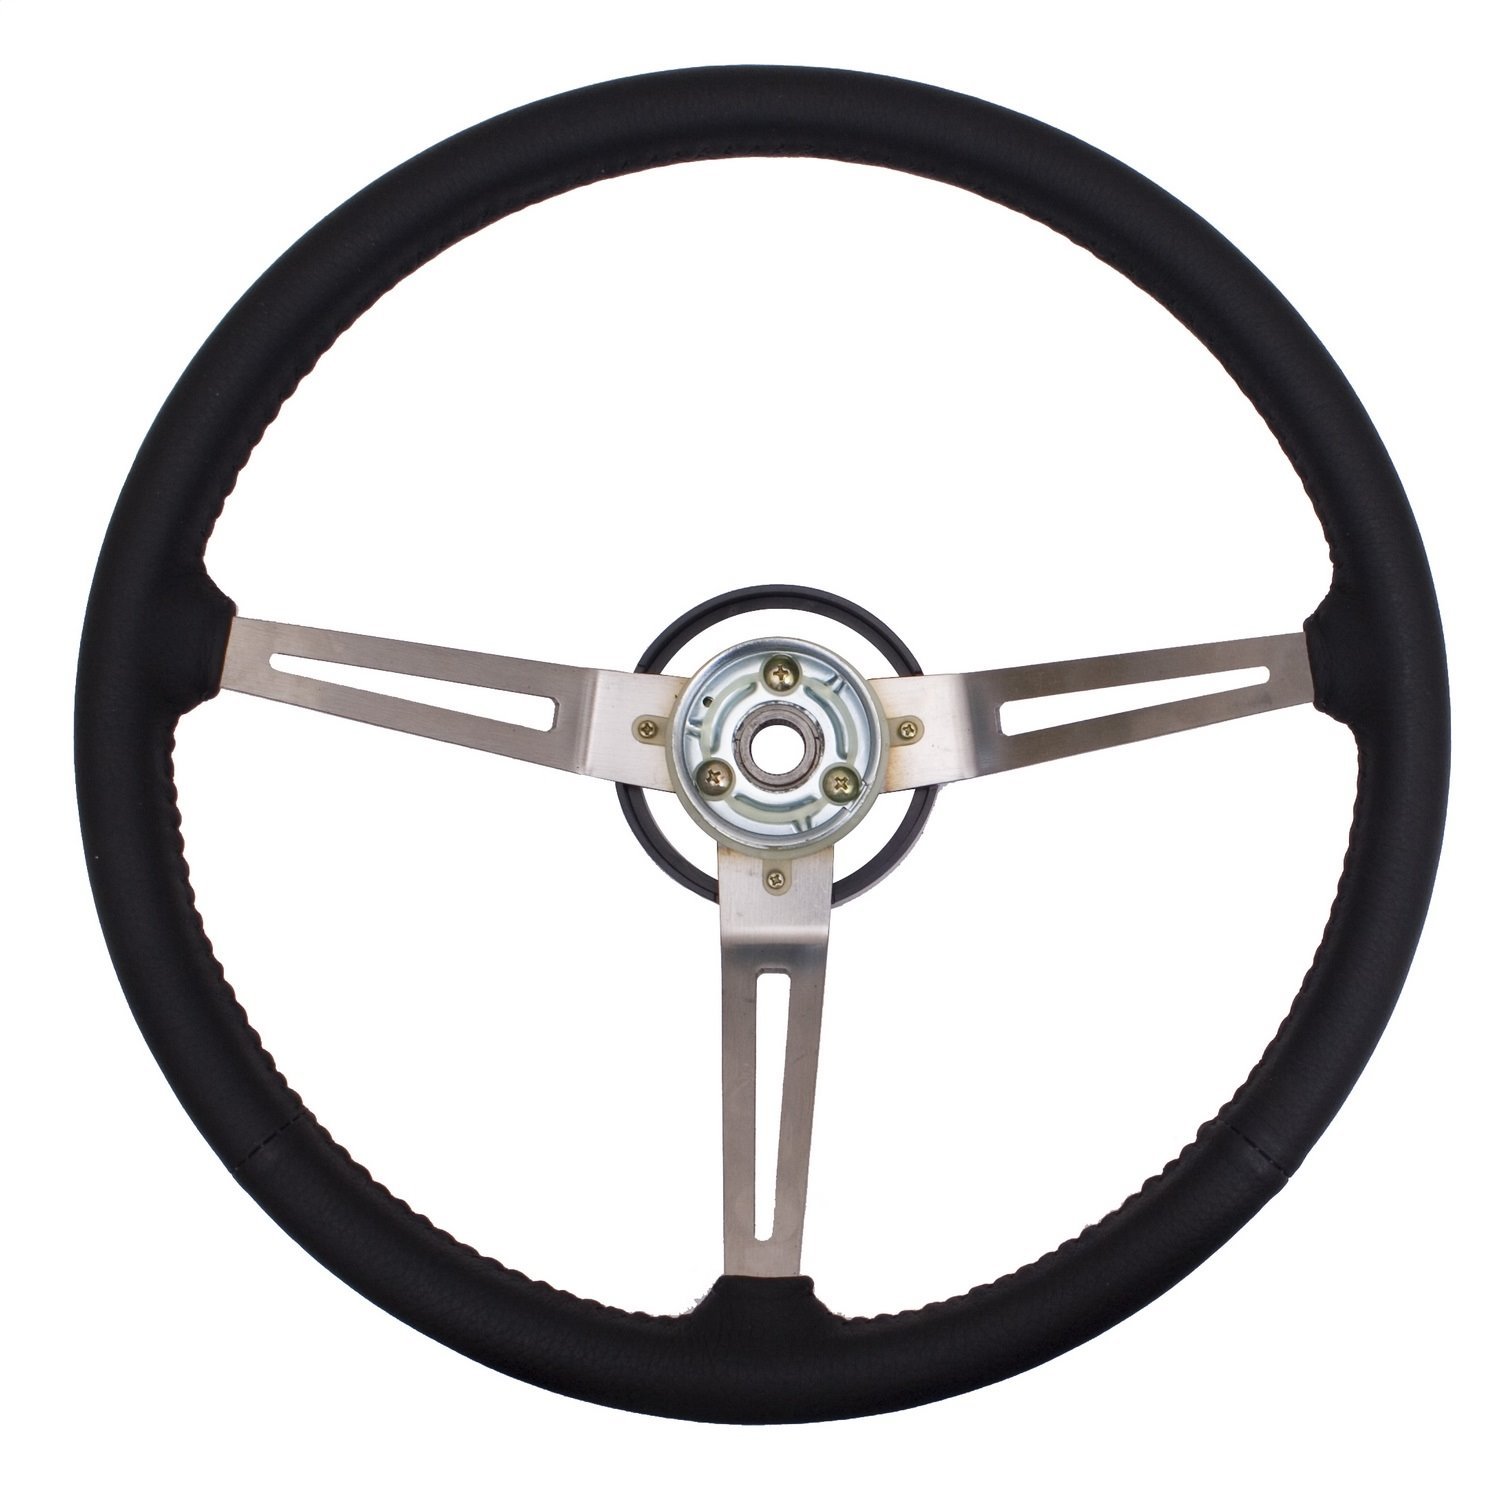 This black leather steering wheel from Omix-ADA fits 76-95 Jeep CJs & Wranglers.